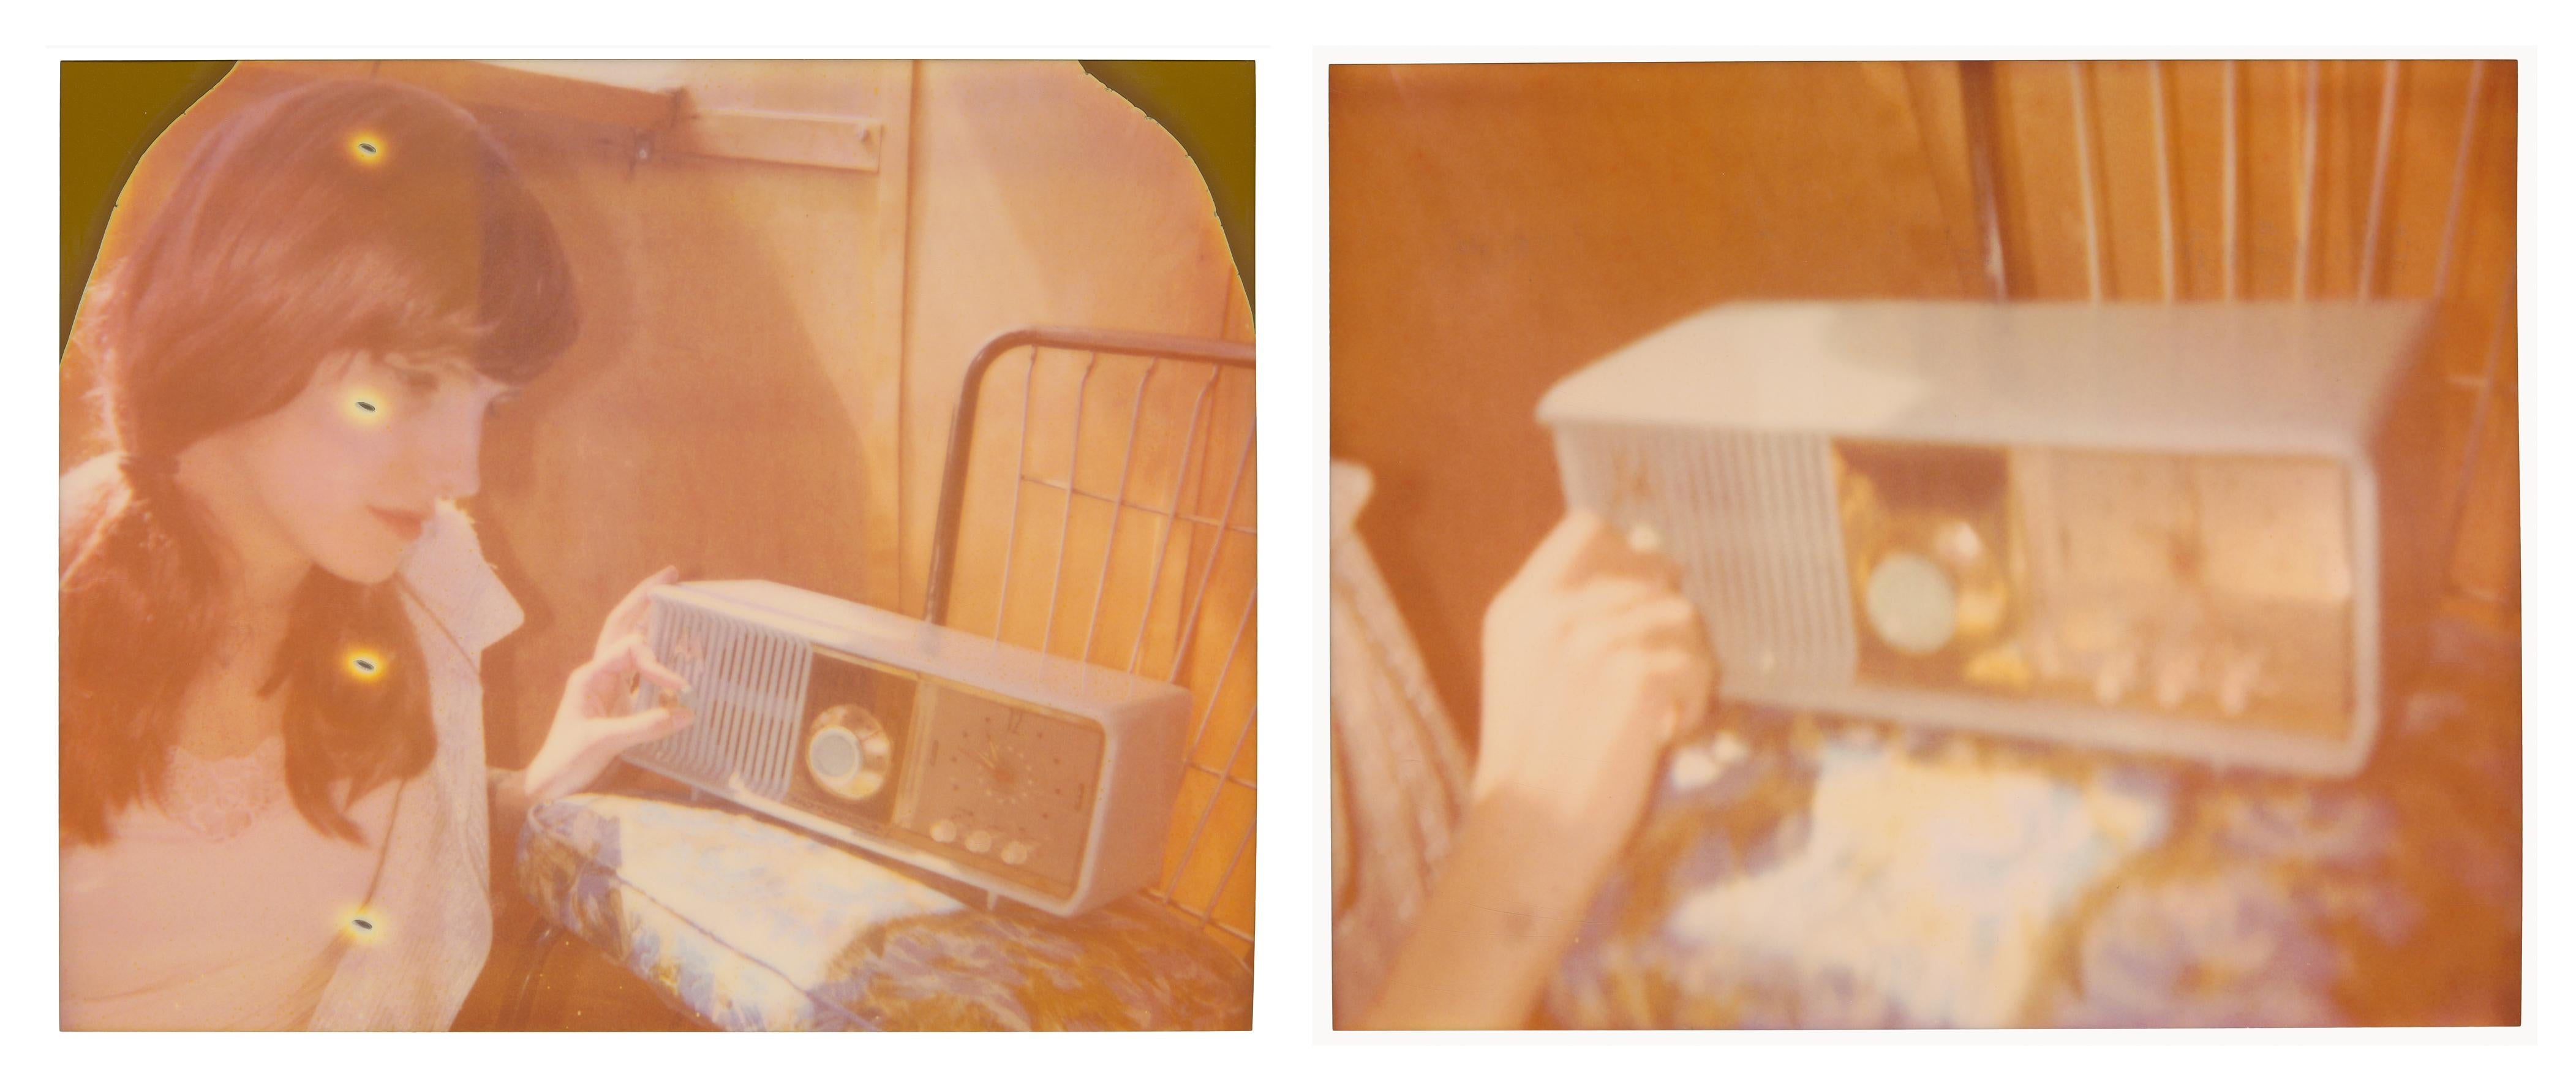 Stefanie Schneider Color Photograph - Radio Show (The Girl behind the White Picket Fence) - diptych